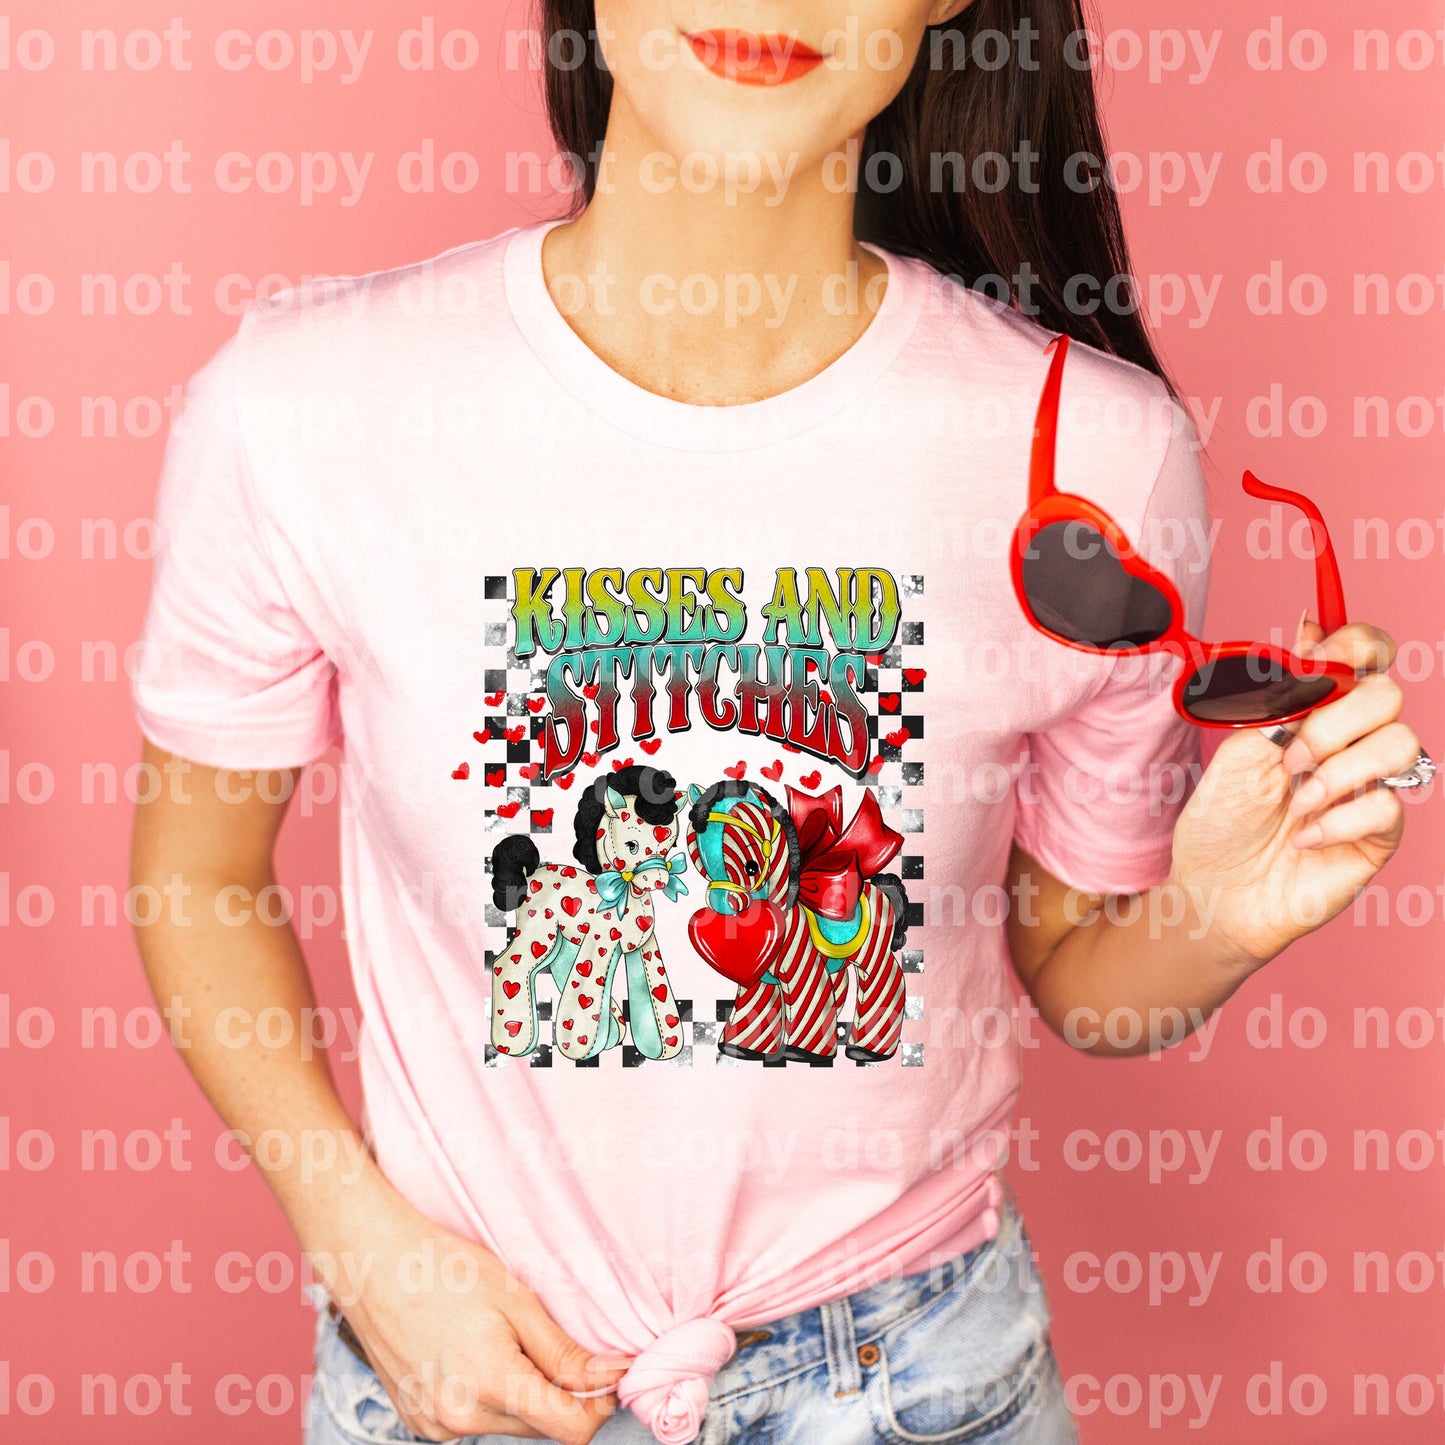 Kisses and Stitches with Optional Sleeve Design Dream Print or Sublimation Print